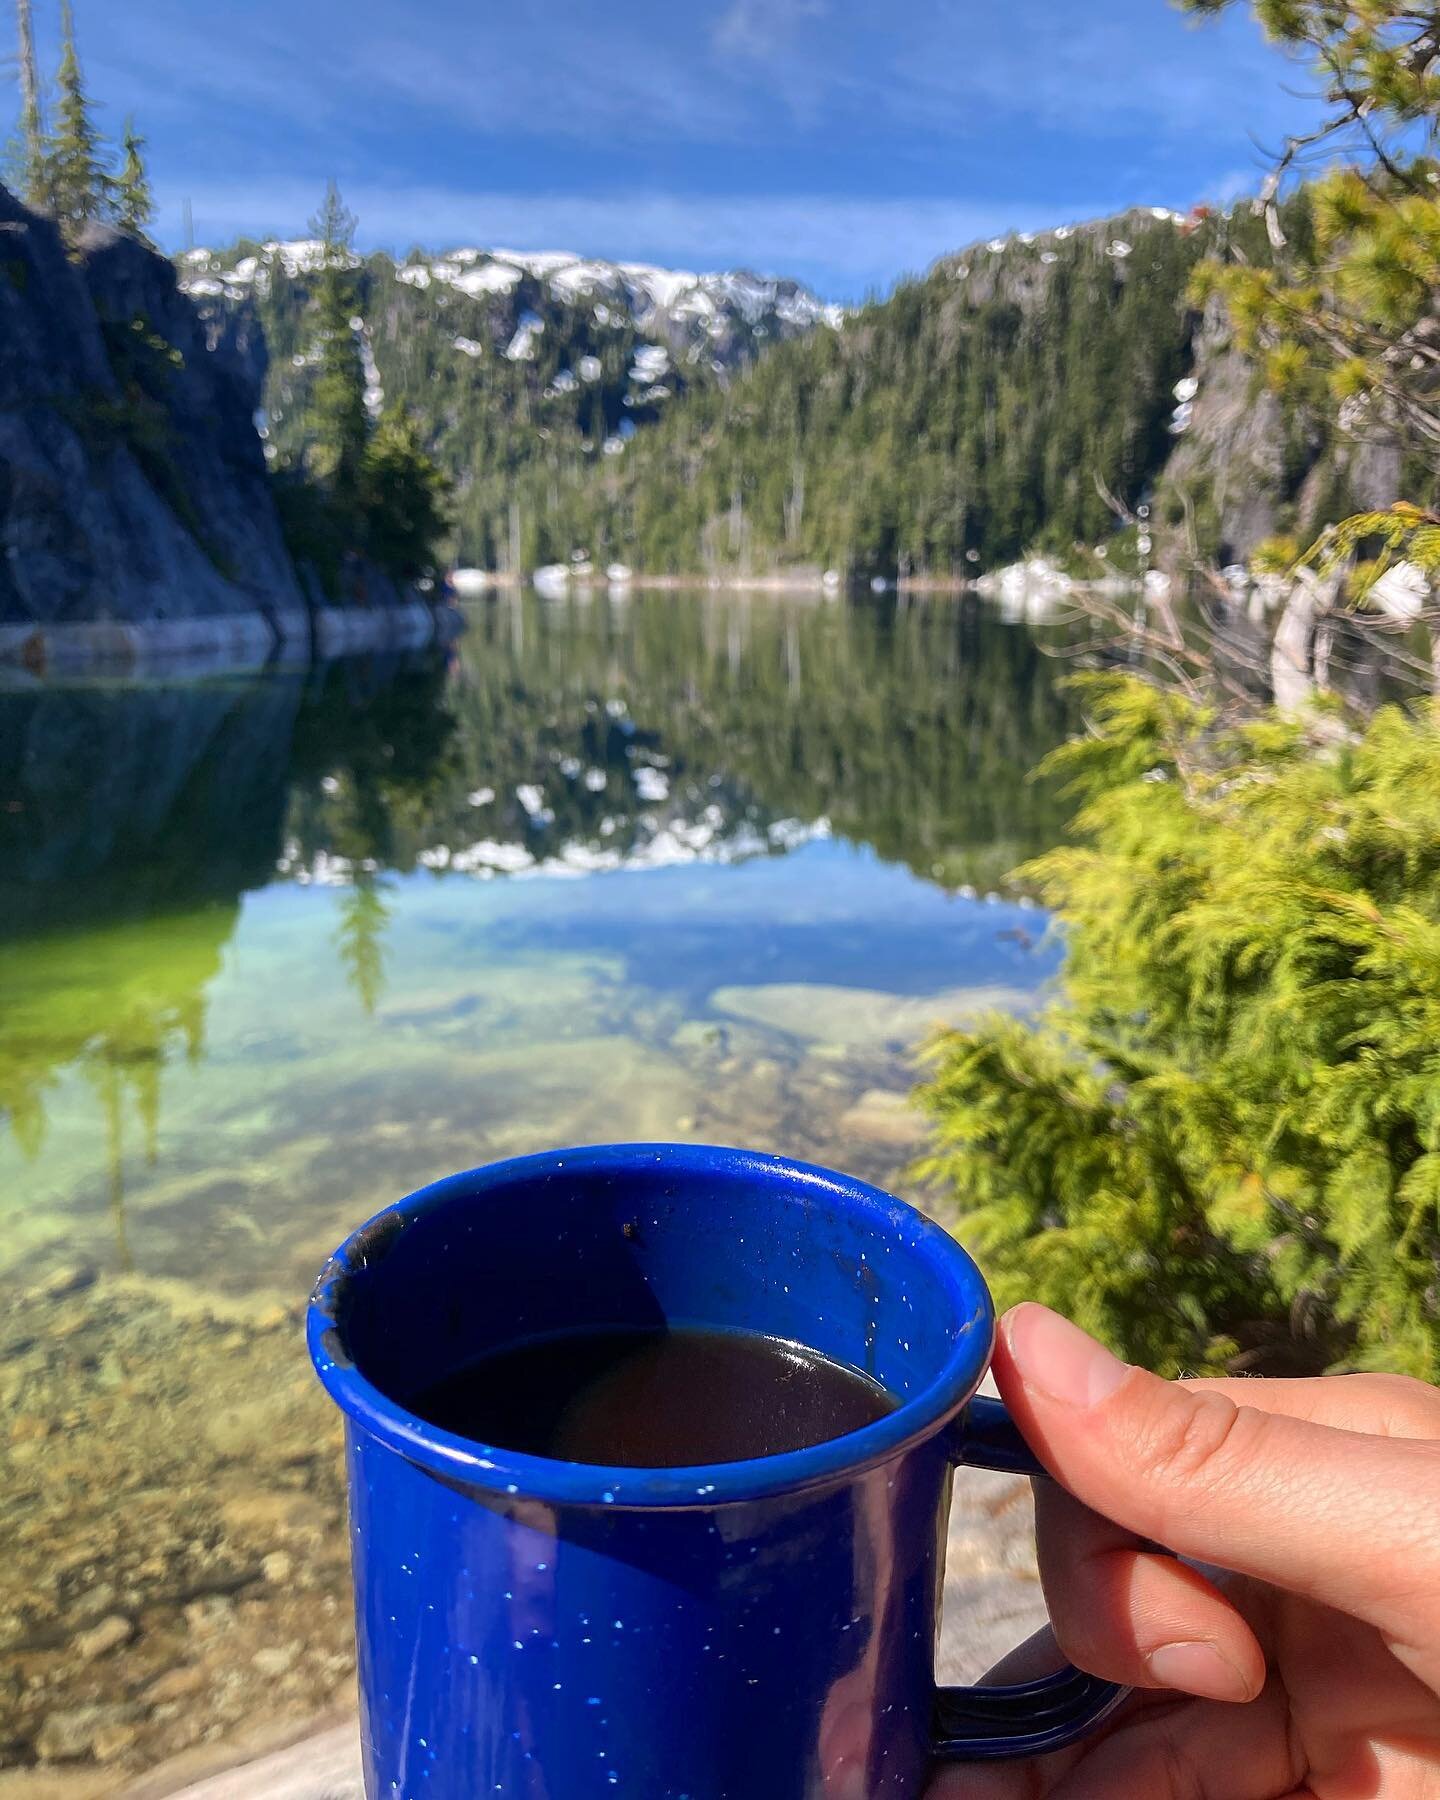 This Sunday morning&rsquo;s adaptogen based coffee view👌🏼

#adaptogens #coffee #nature #backcountry #vancouverisland #hiking #camping #getoutside